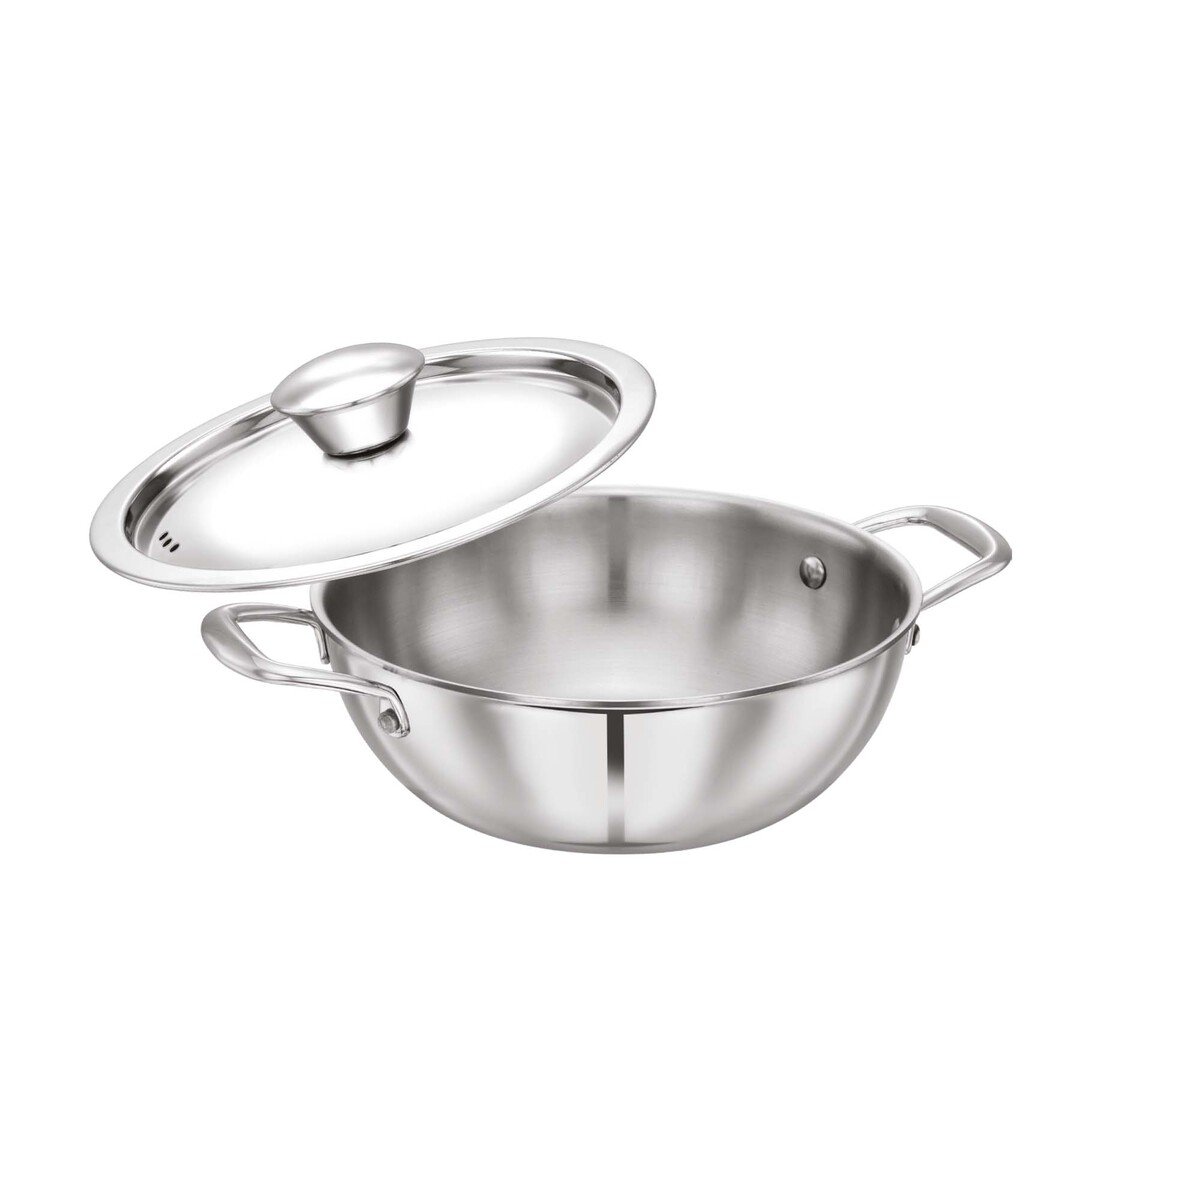 Chefline Stainless Steel Tri-Ply Kadai With Lid, 24 cm, INDRI